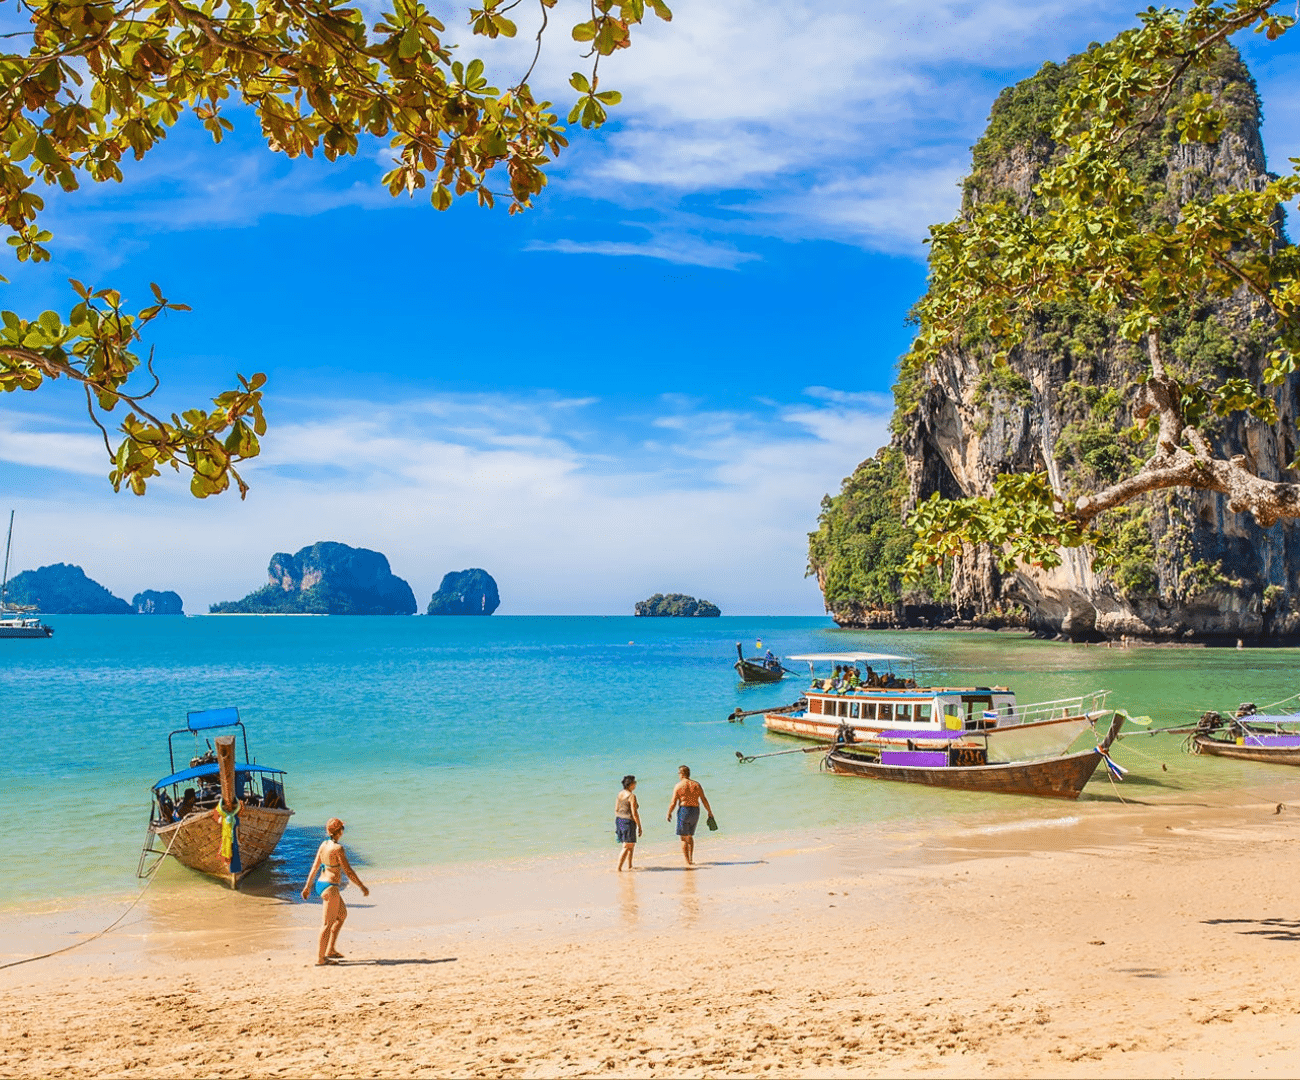 Krabi included in thailand tour package